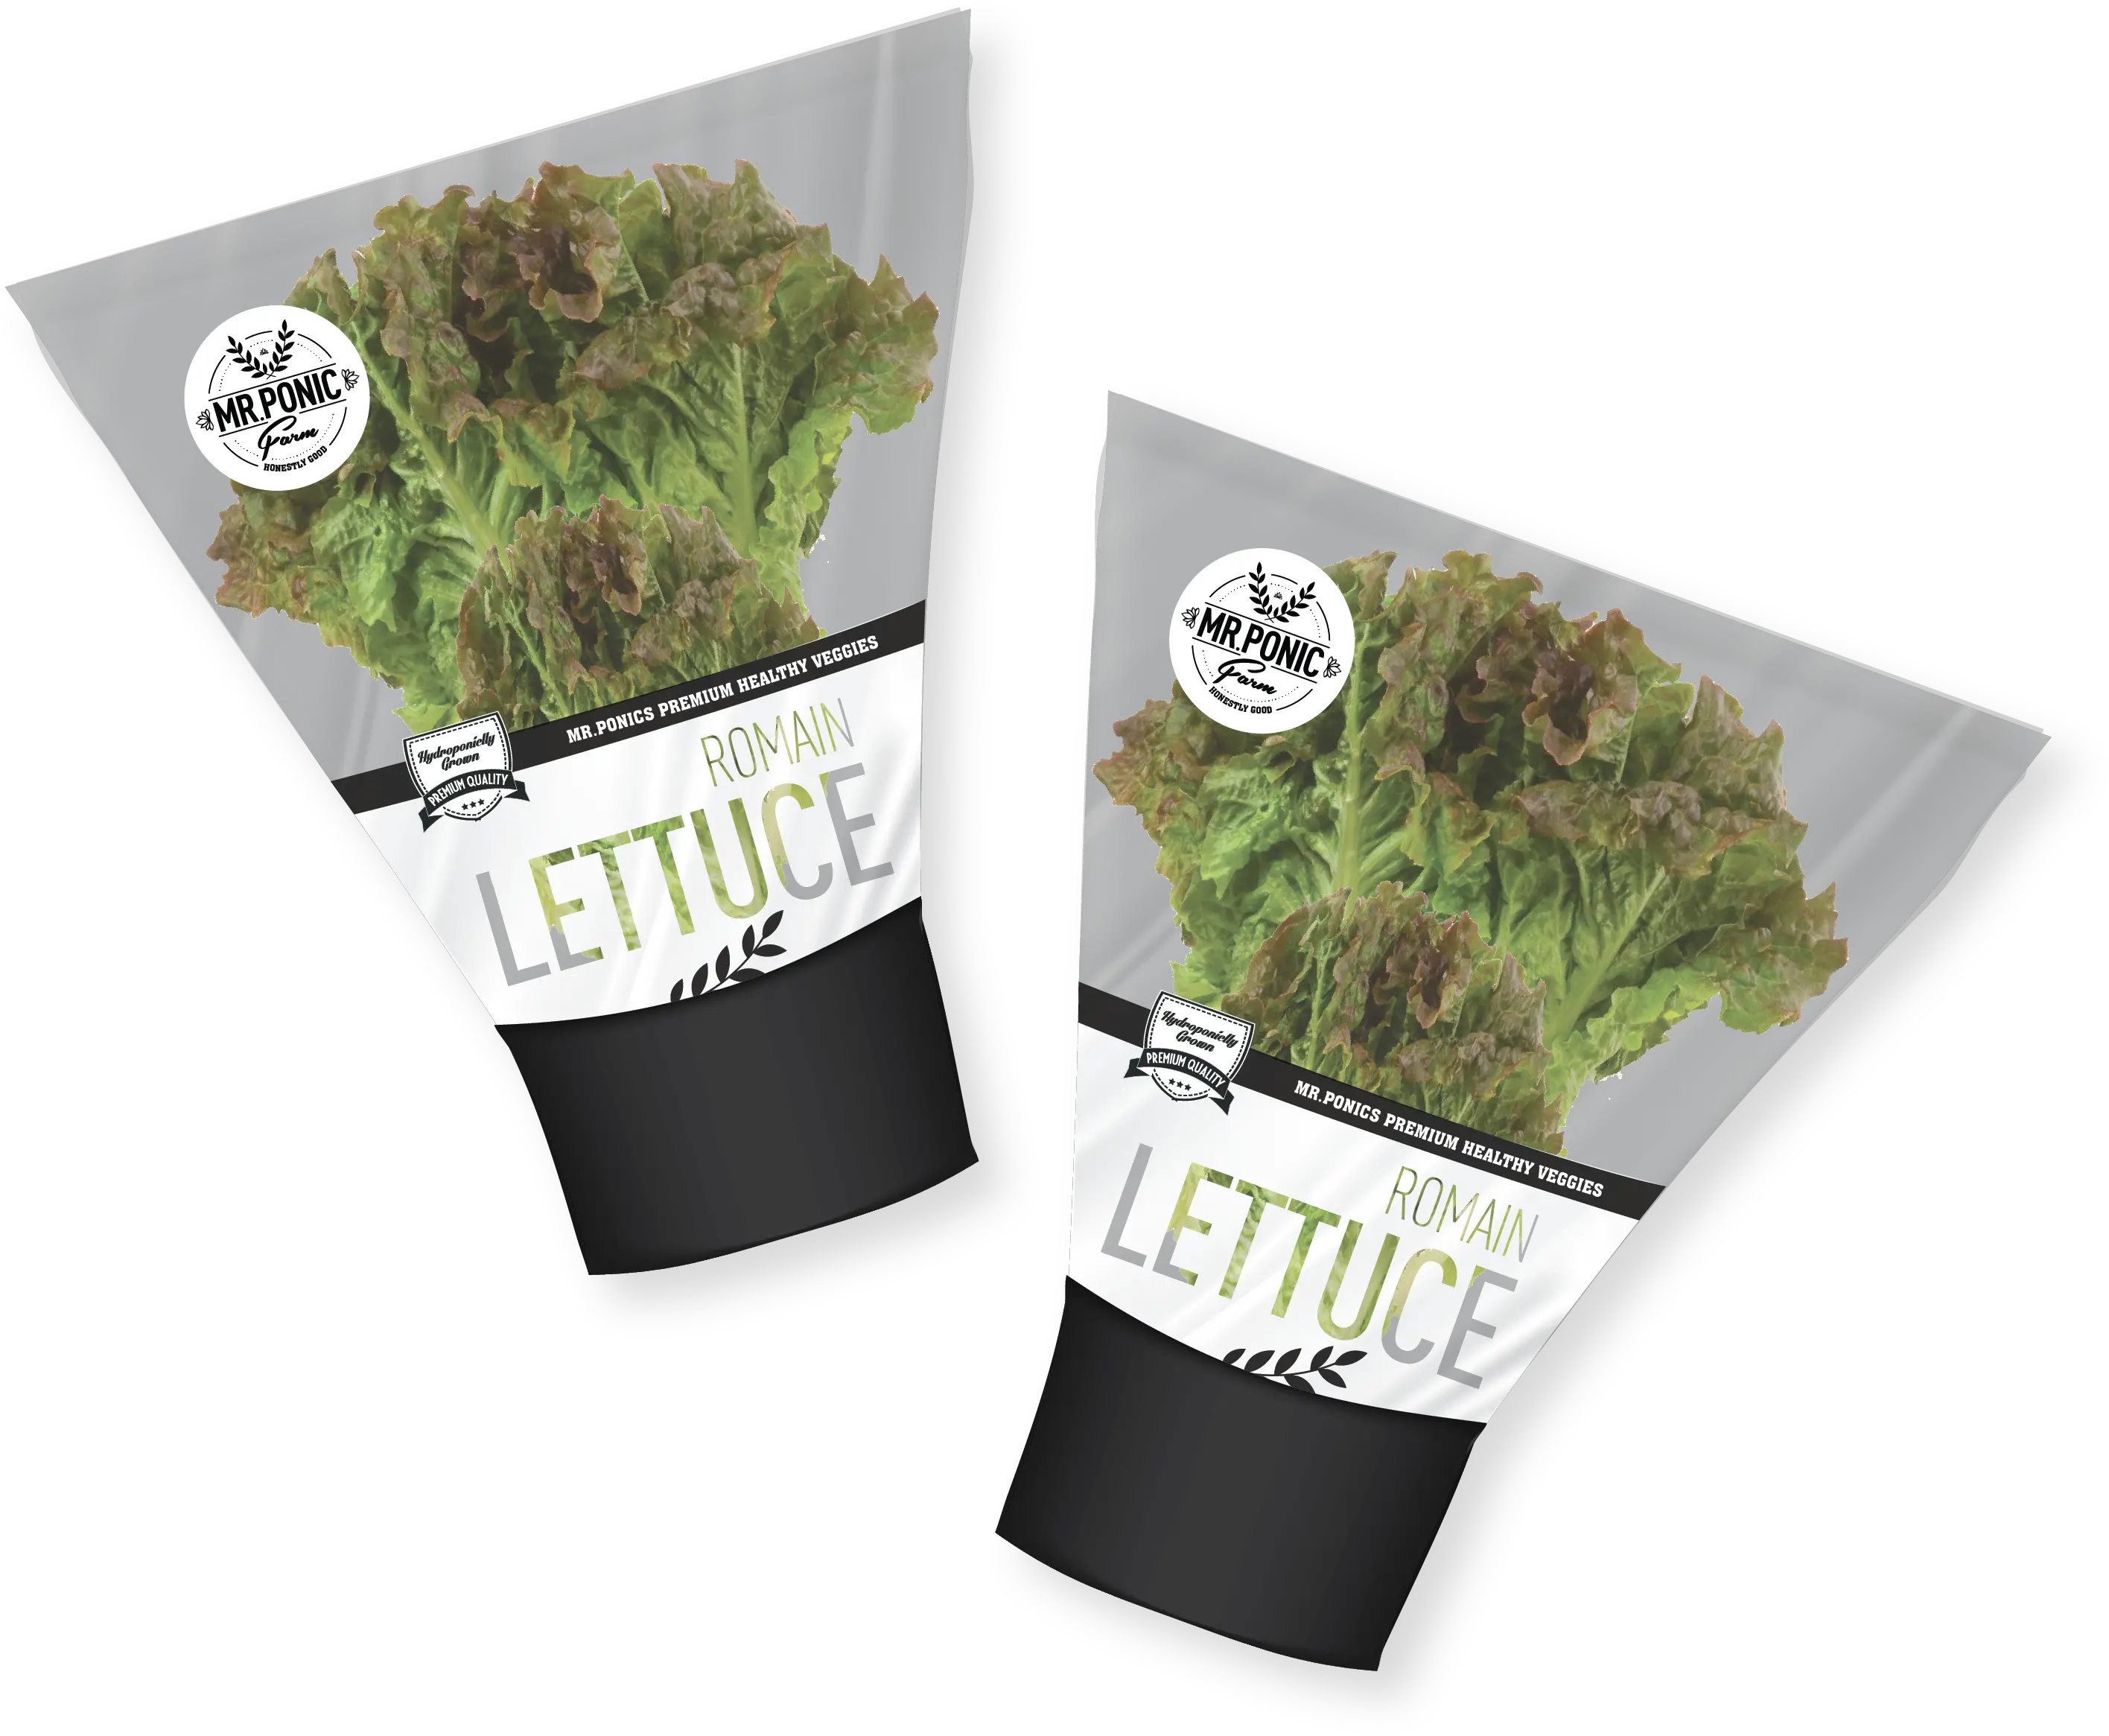 Download View Larger Image Lettuce Png Image With No Romaine Lettuce Lettuce Png